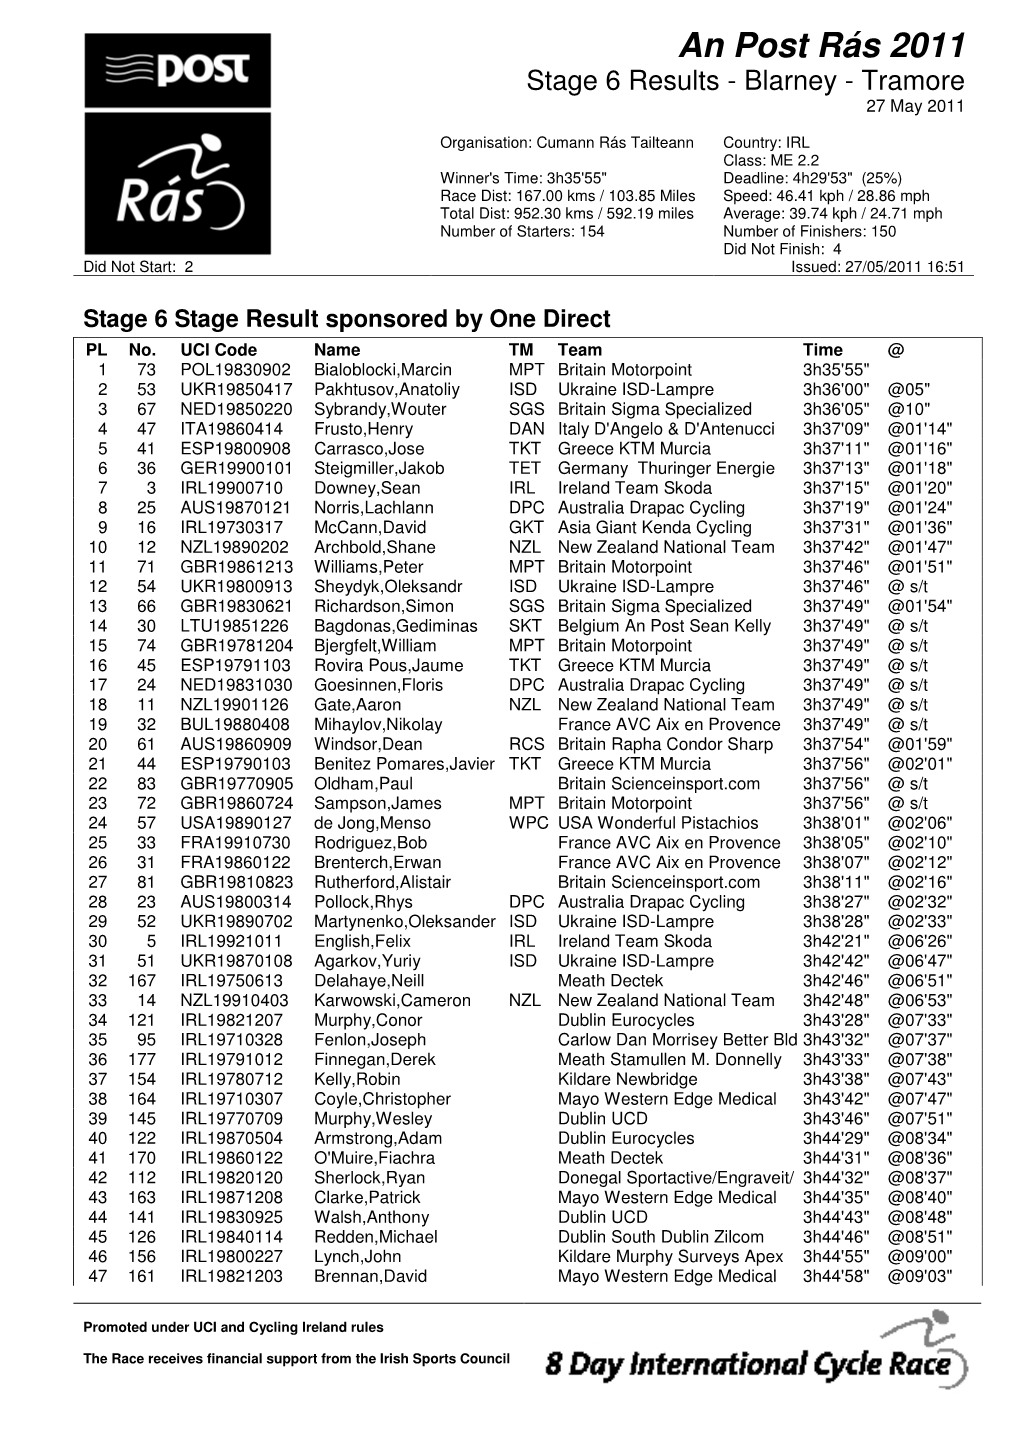 An Post Rás 2011 Stage 6 Results - Blarney - Tramore 27 May 2011